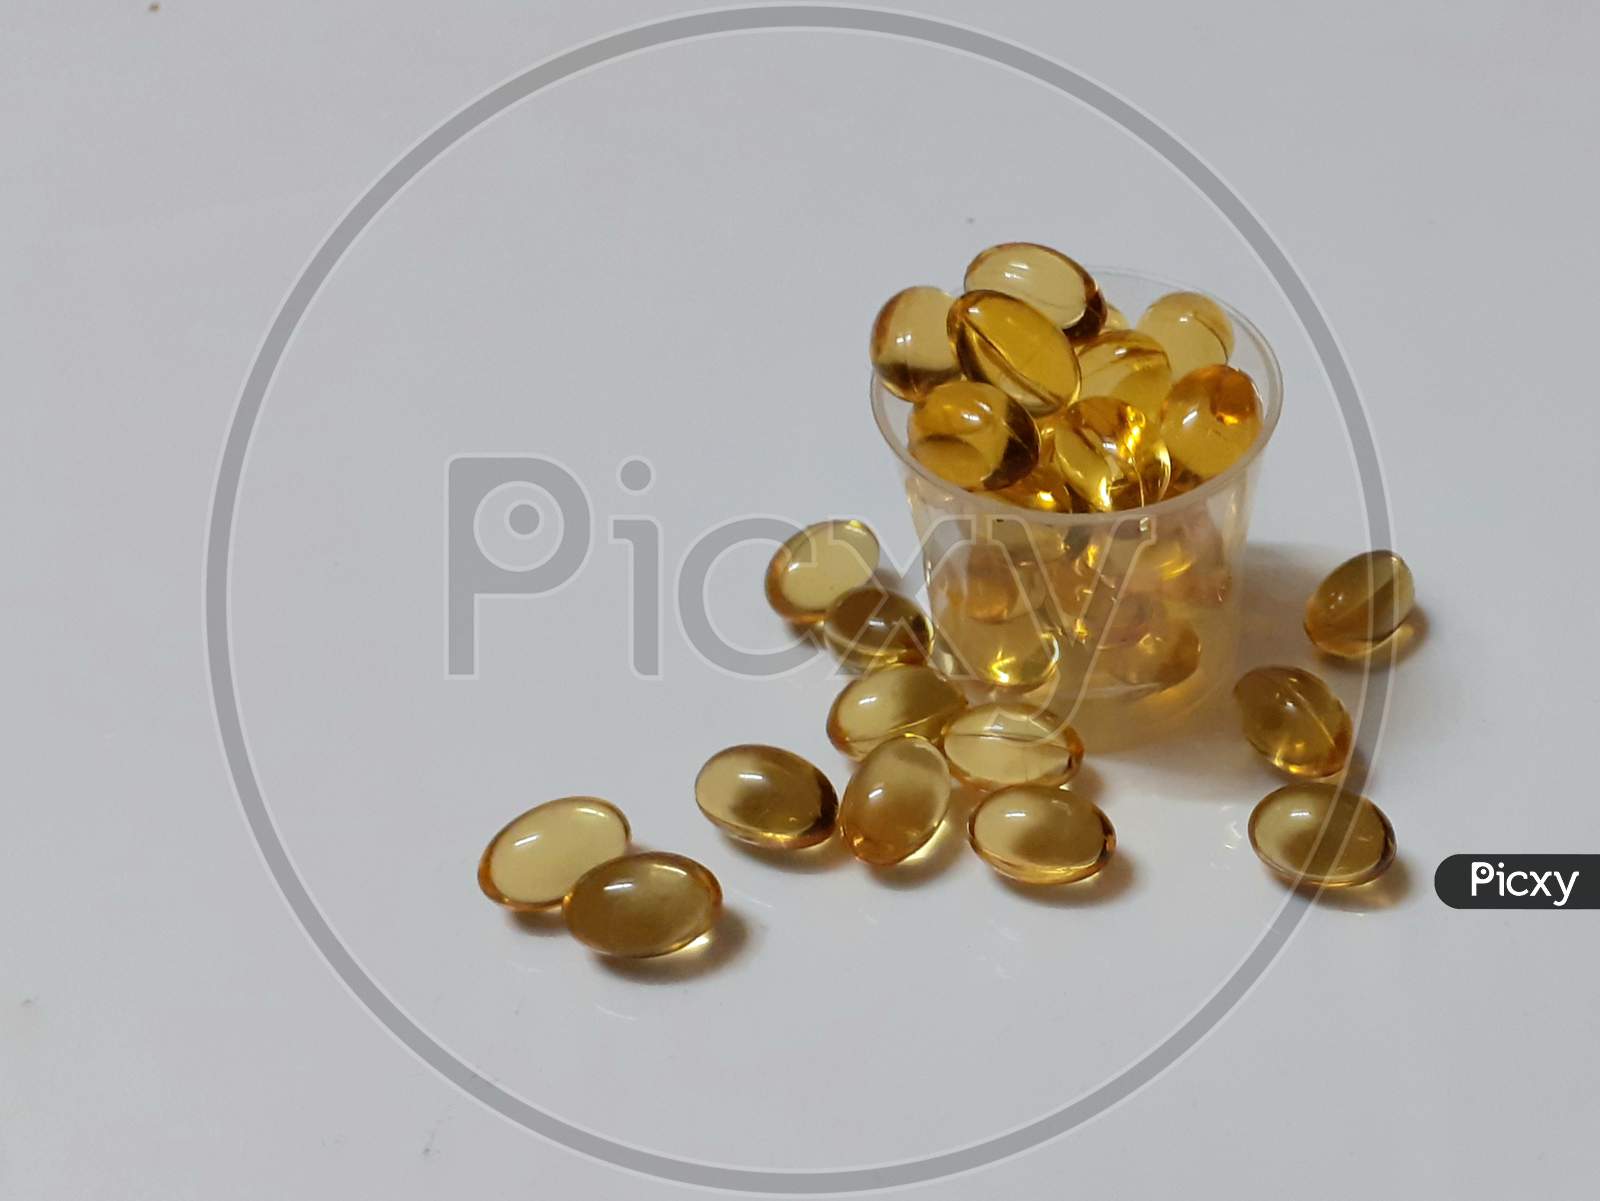 Cod liver oil supplements